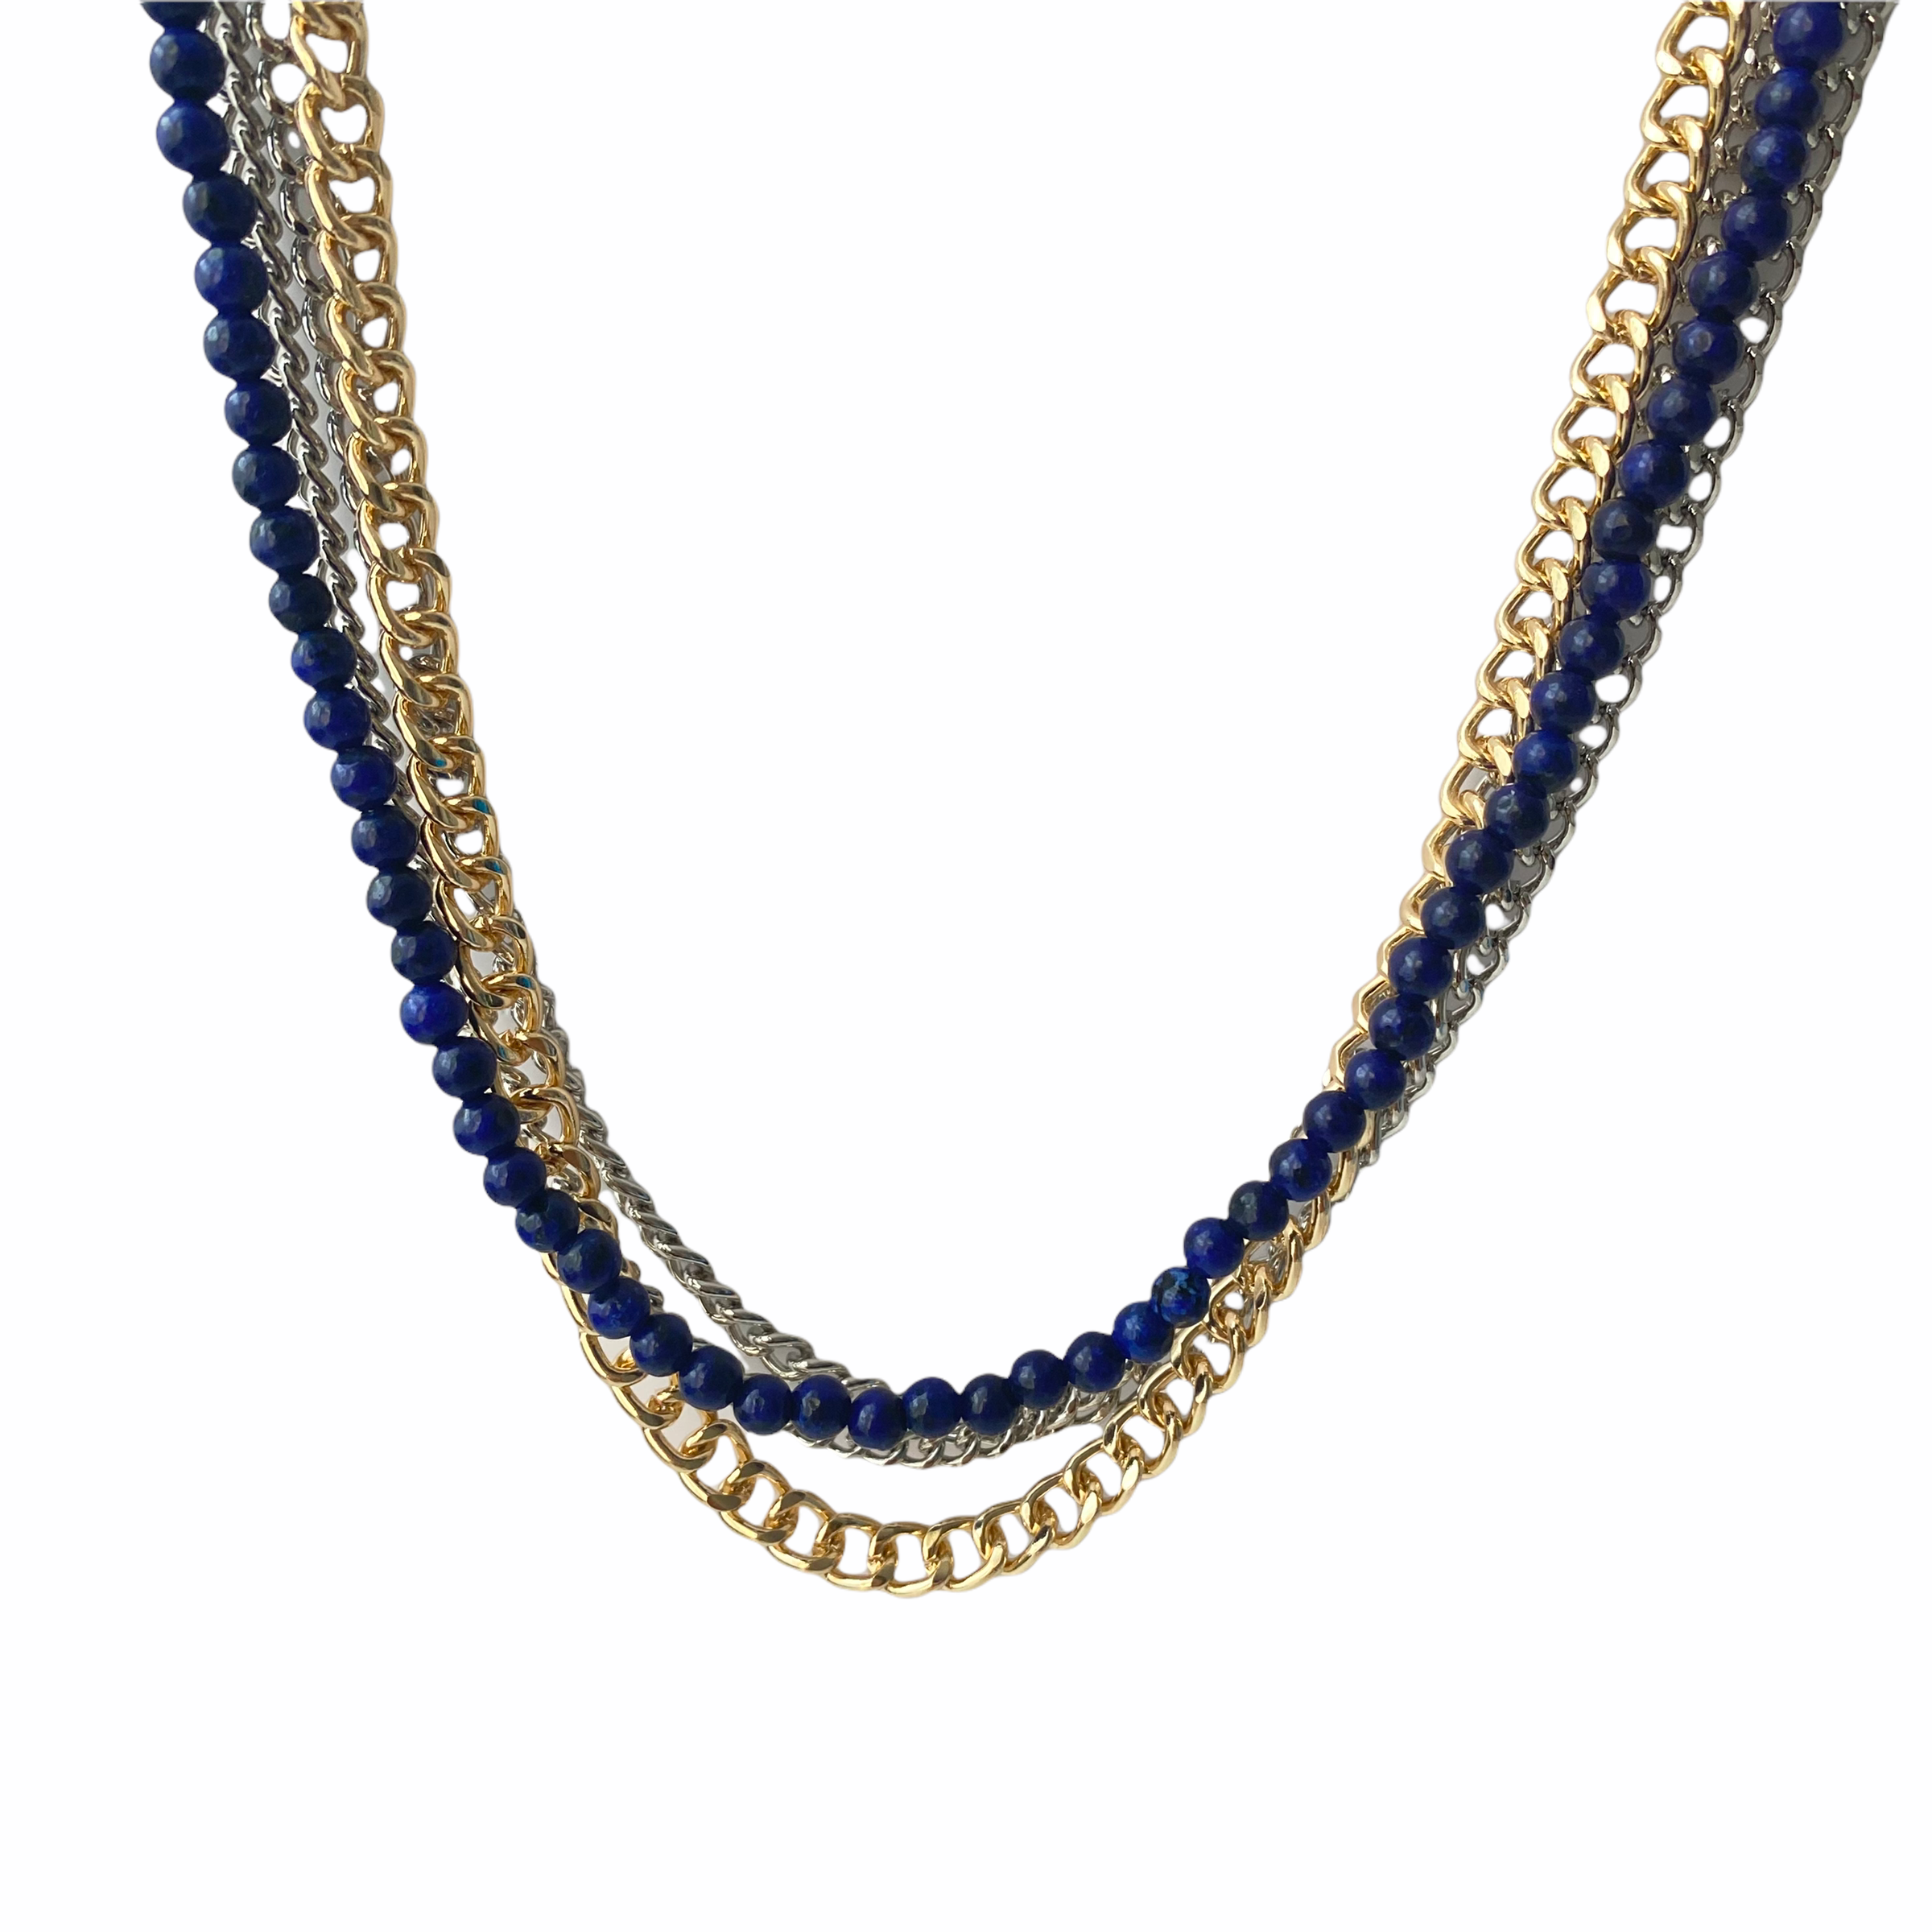 Layered Chain Beads Necklace